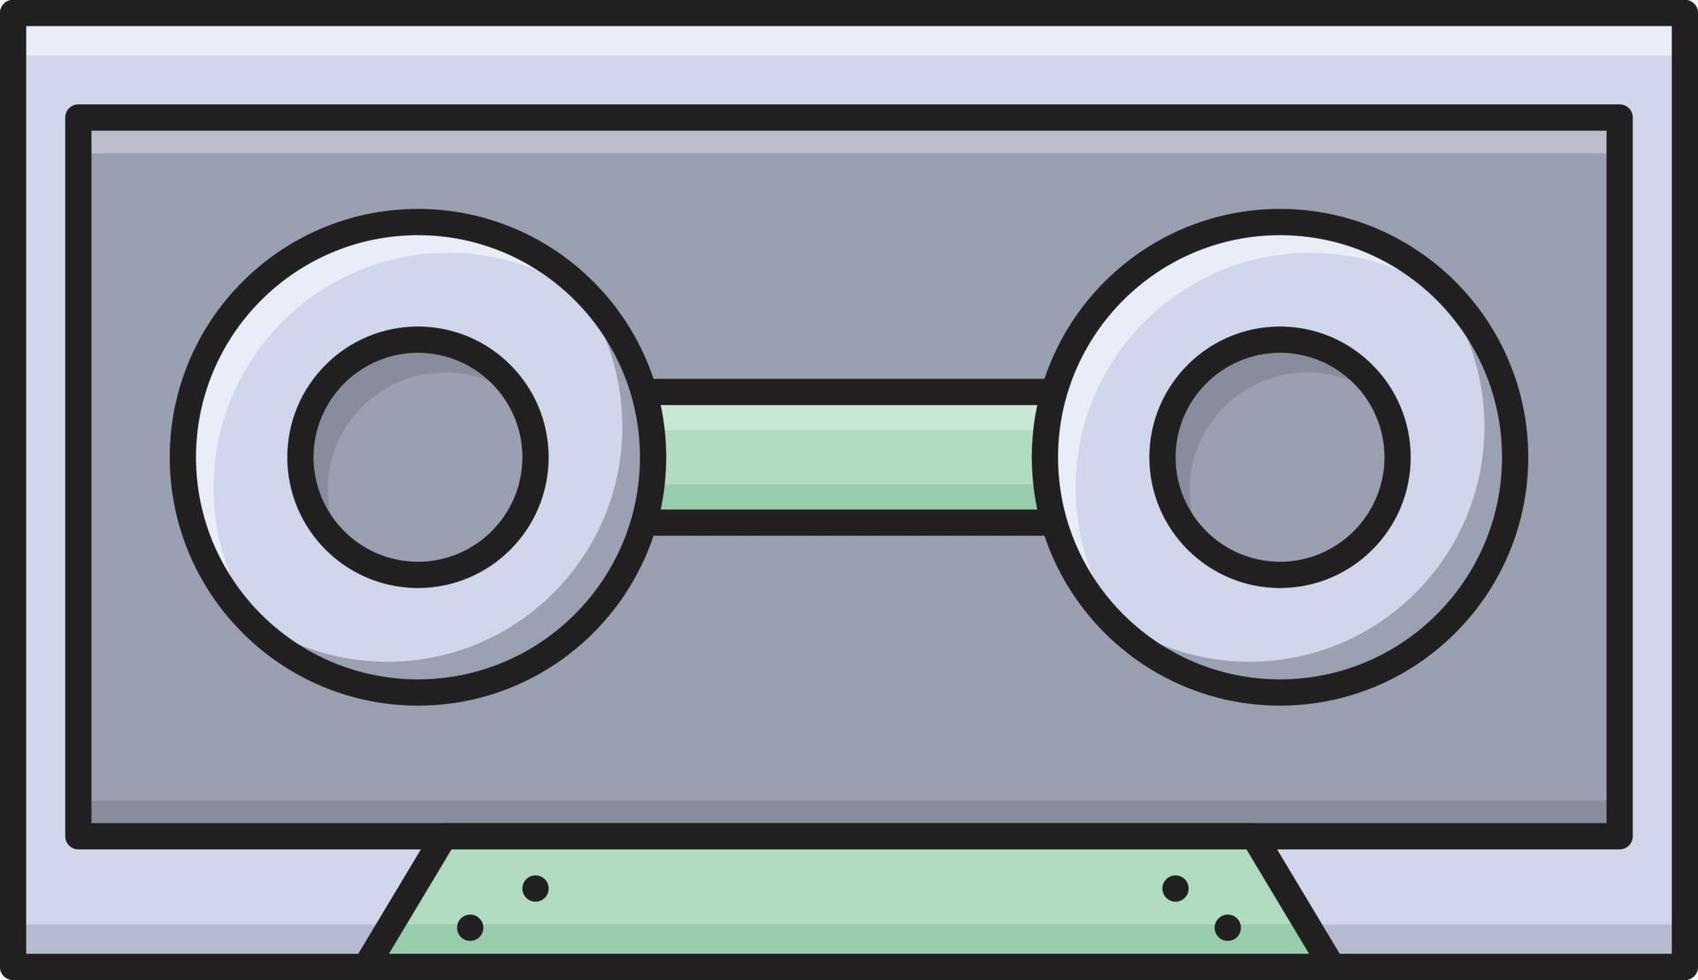 cassette vector illustration on a background.Premium quality symbols.vector icons for concept and graphic design.